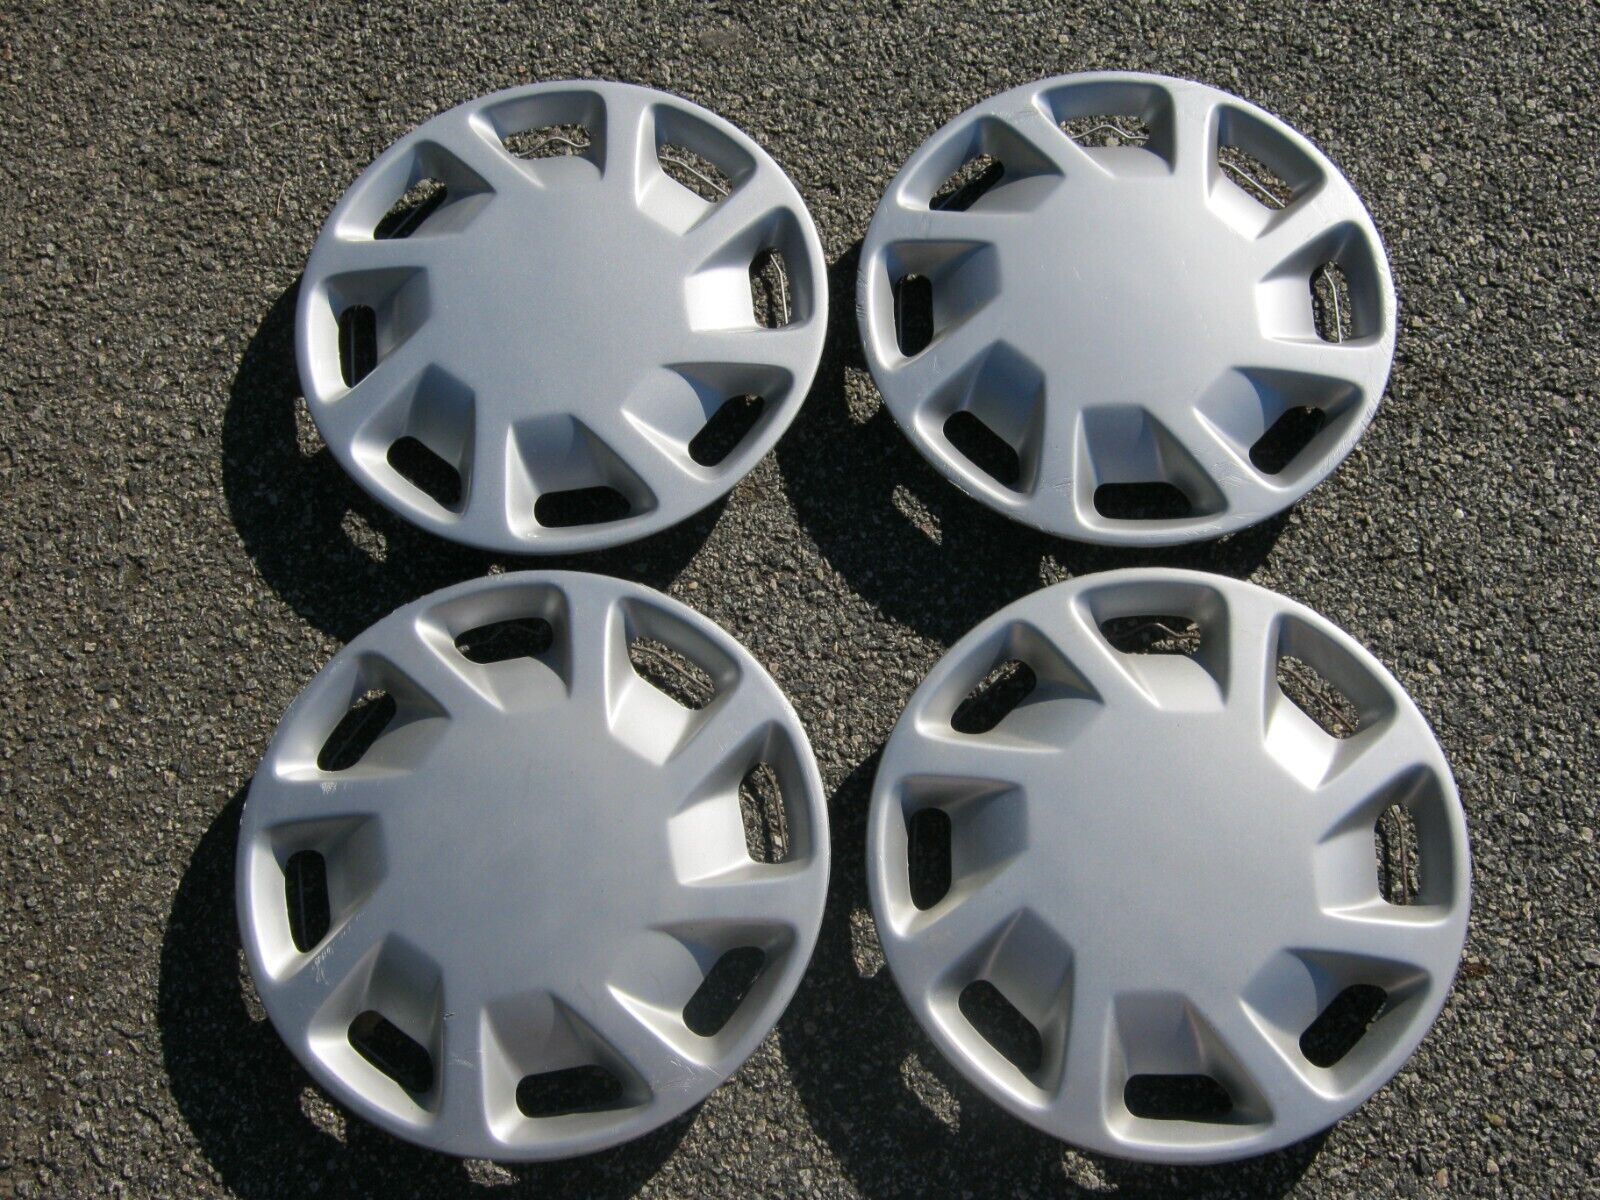 Genuine 1989 to 1992 Ford Probe 14 inch hubcaps wheel covers